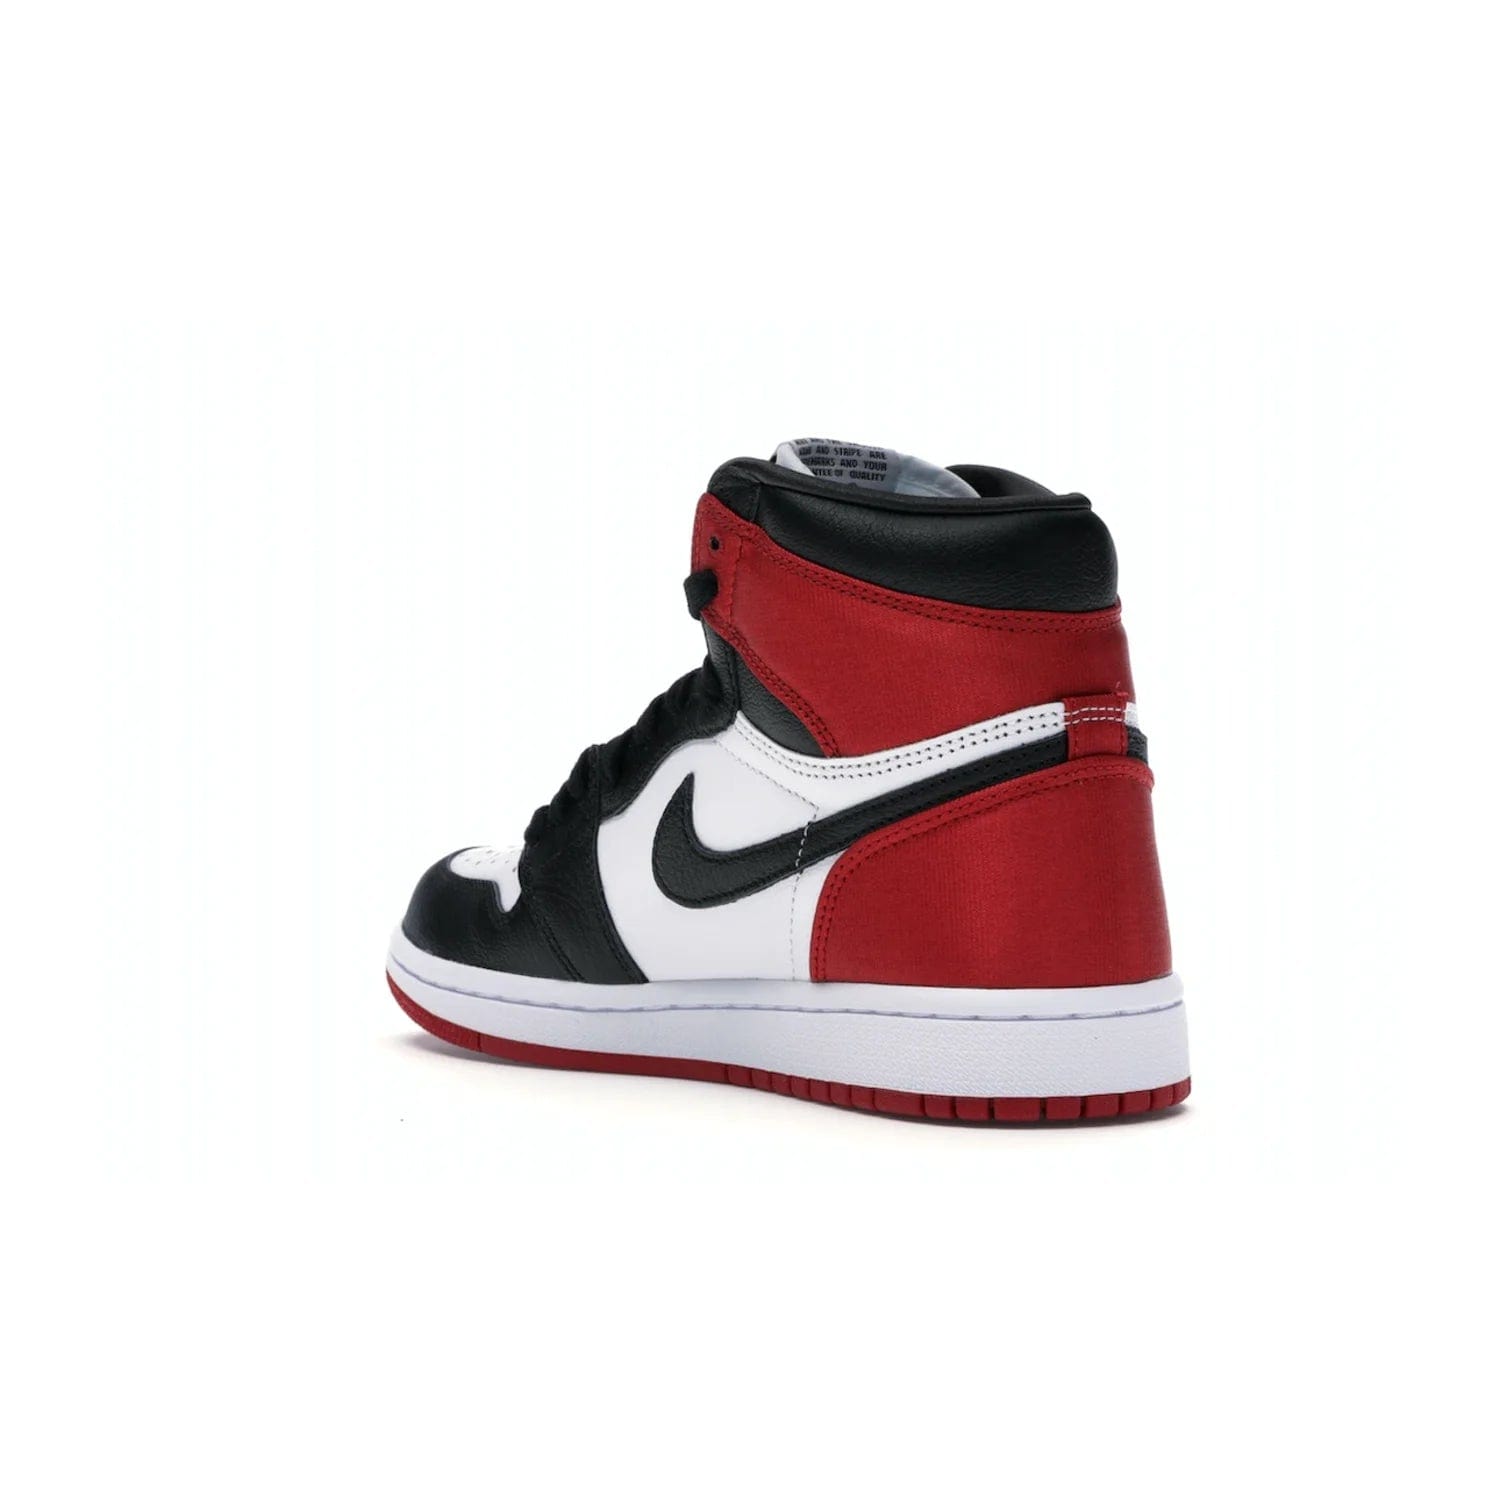 Jordan 1 Retro High Satin Black Toe (Women's) - Image 24 - Only at www.BallersClubKickz.com - Luxurious take on the timeless Air Jordan 1. Features a mix of black leather and satin materials with subtle University Red accents. Elevated look with metal Wings logo on the heel. Released in August 2019.